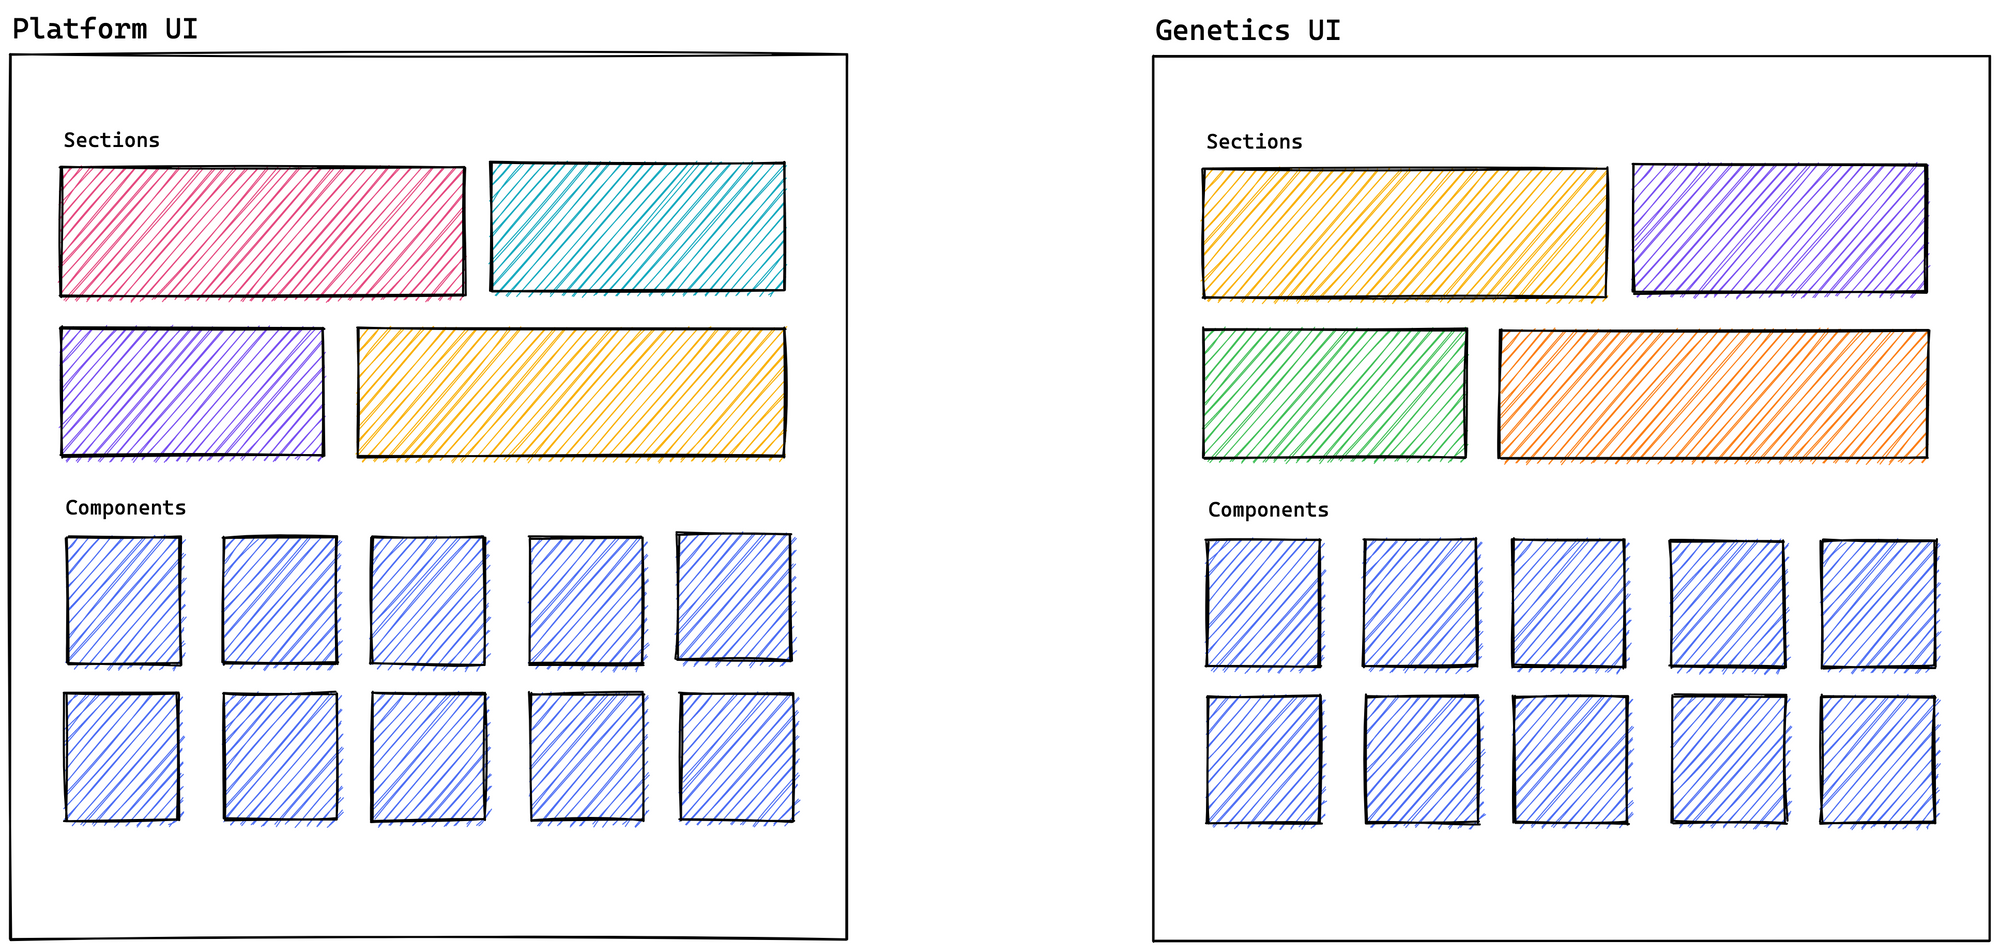 Using different coloured boxes, the Platform and Genetics UIs are represented as having different sections, but similar components. 